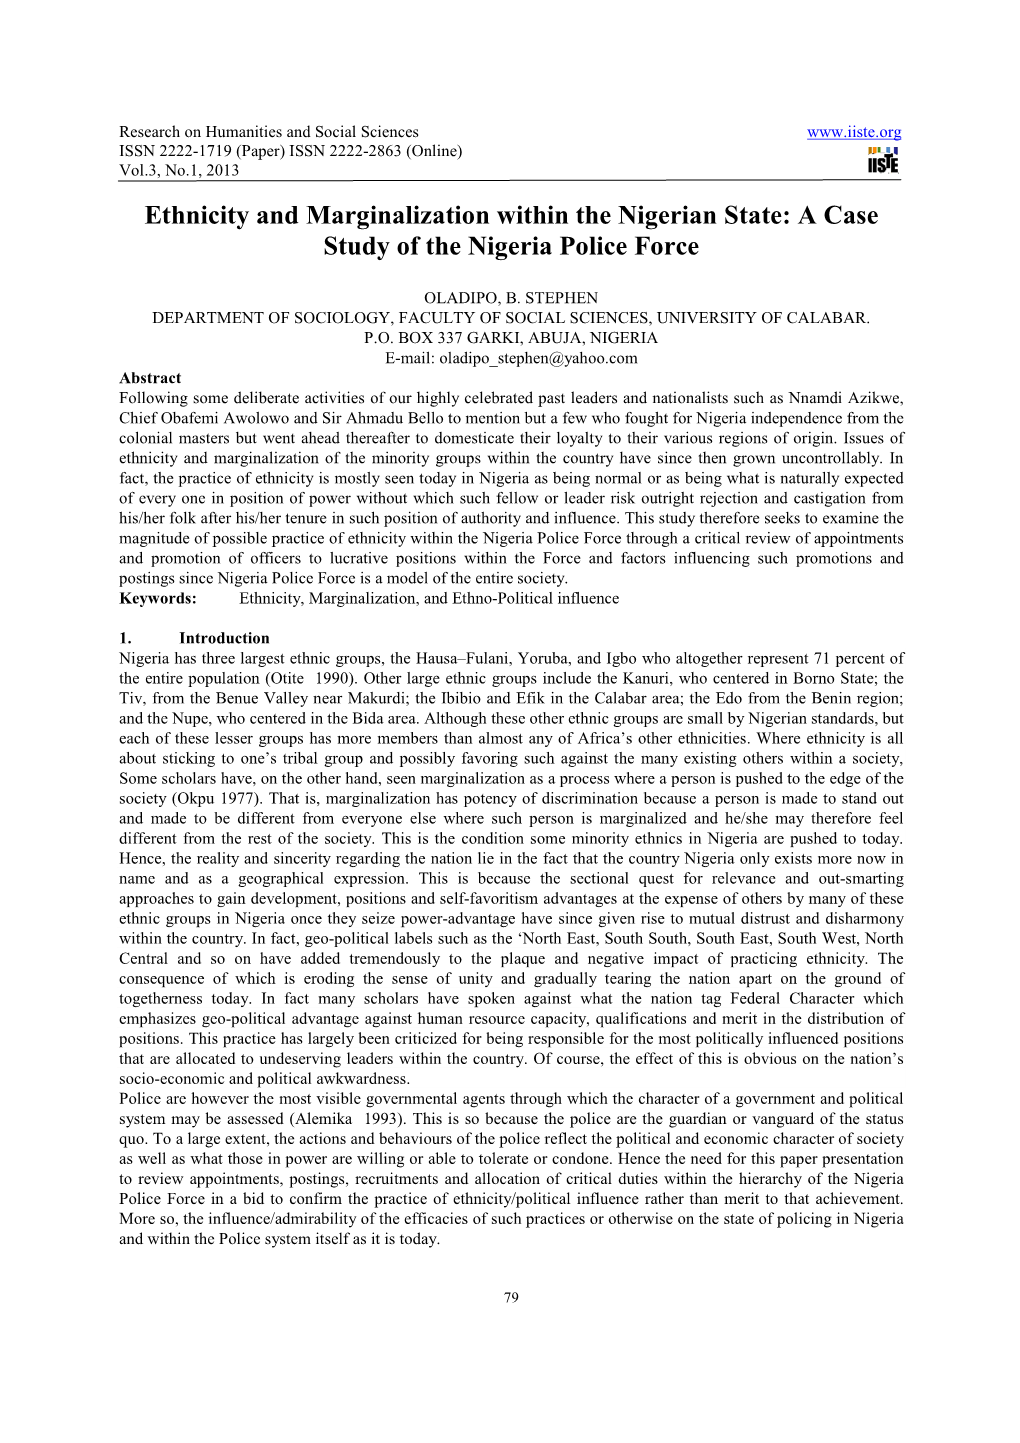 Ethnicity and Marginalization Within the Nigerian State: a Case Study of the Nigeria Police Force